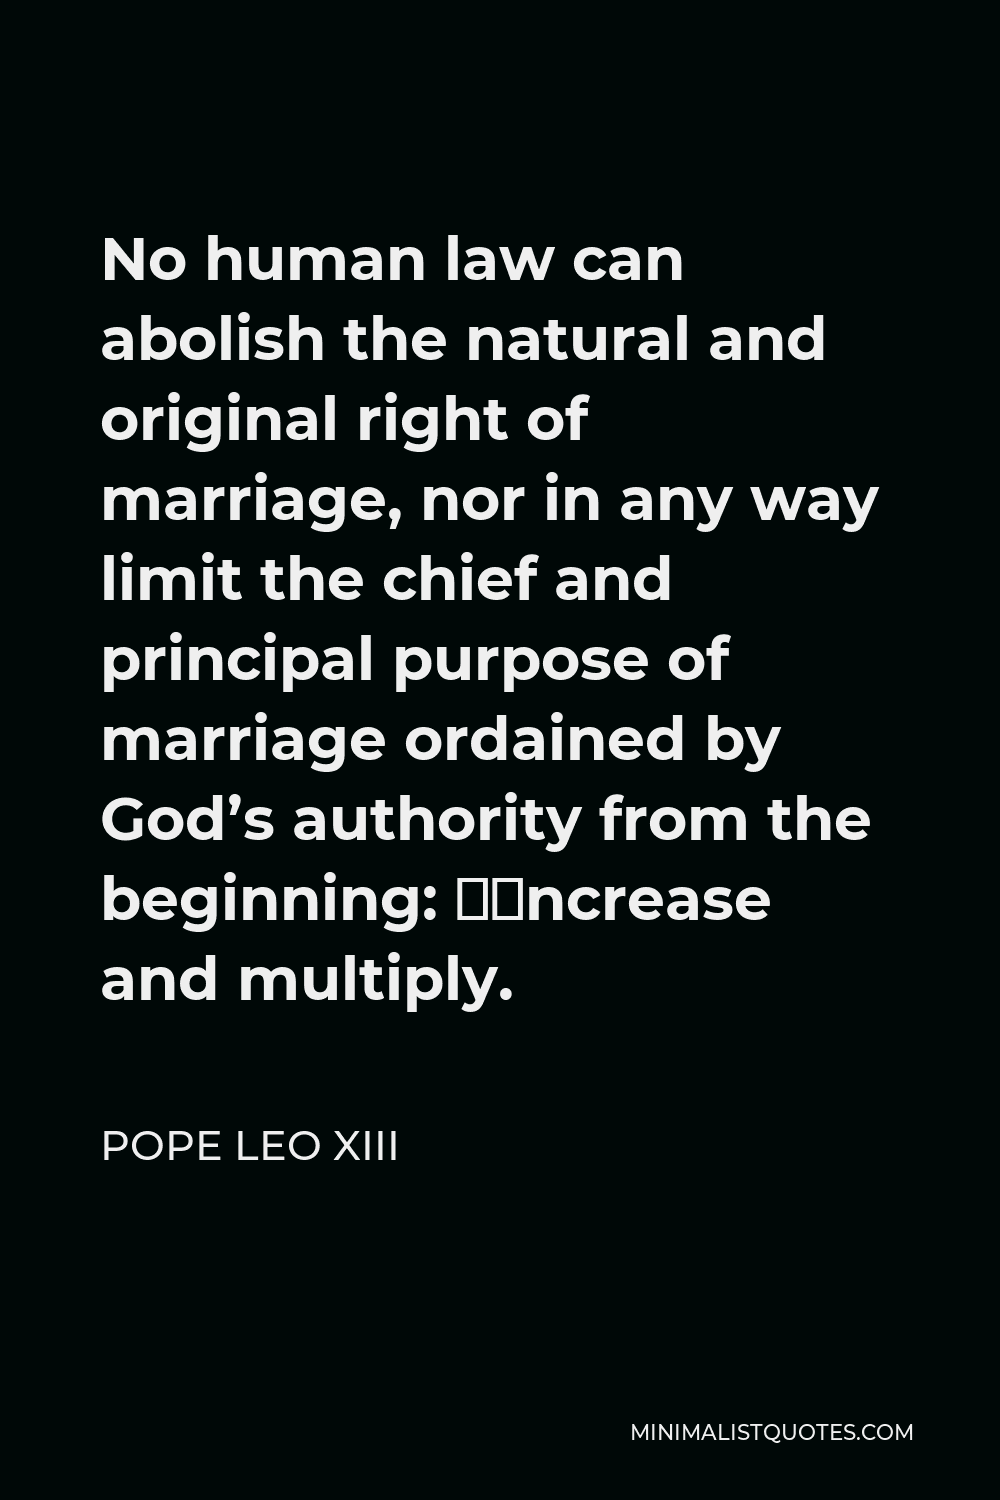 Pope Leo XIII Quote - No human law can abolish the natural and original right of marriage, nor in any way limit the chief and principal purpose of marriage ordained by God’s authority from the beginning: “Increase and multiply.